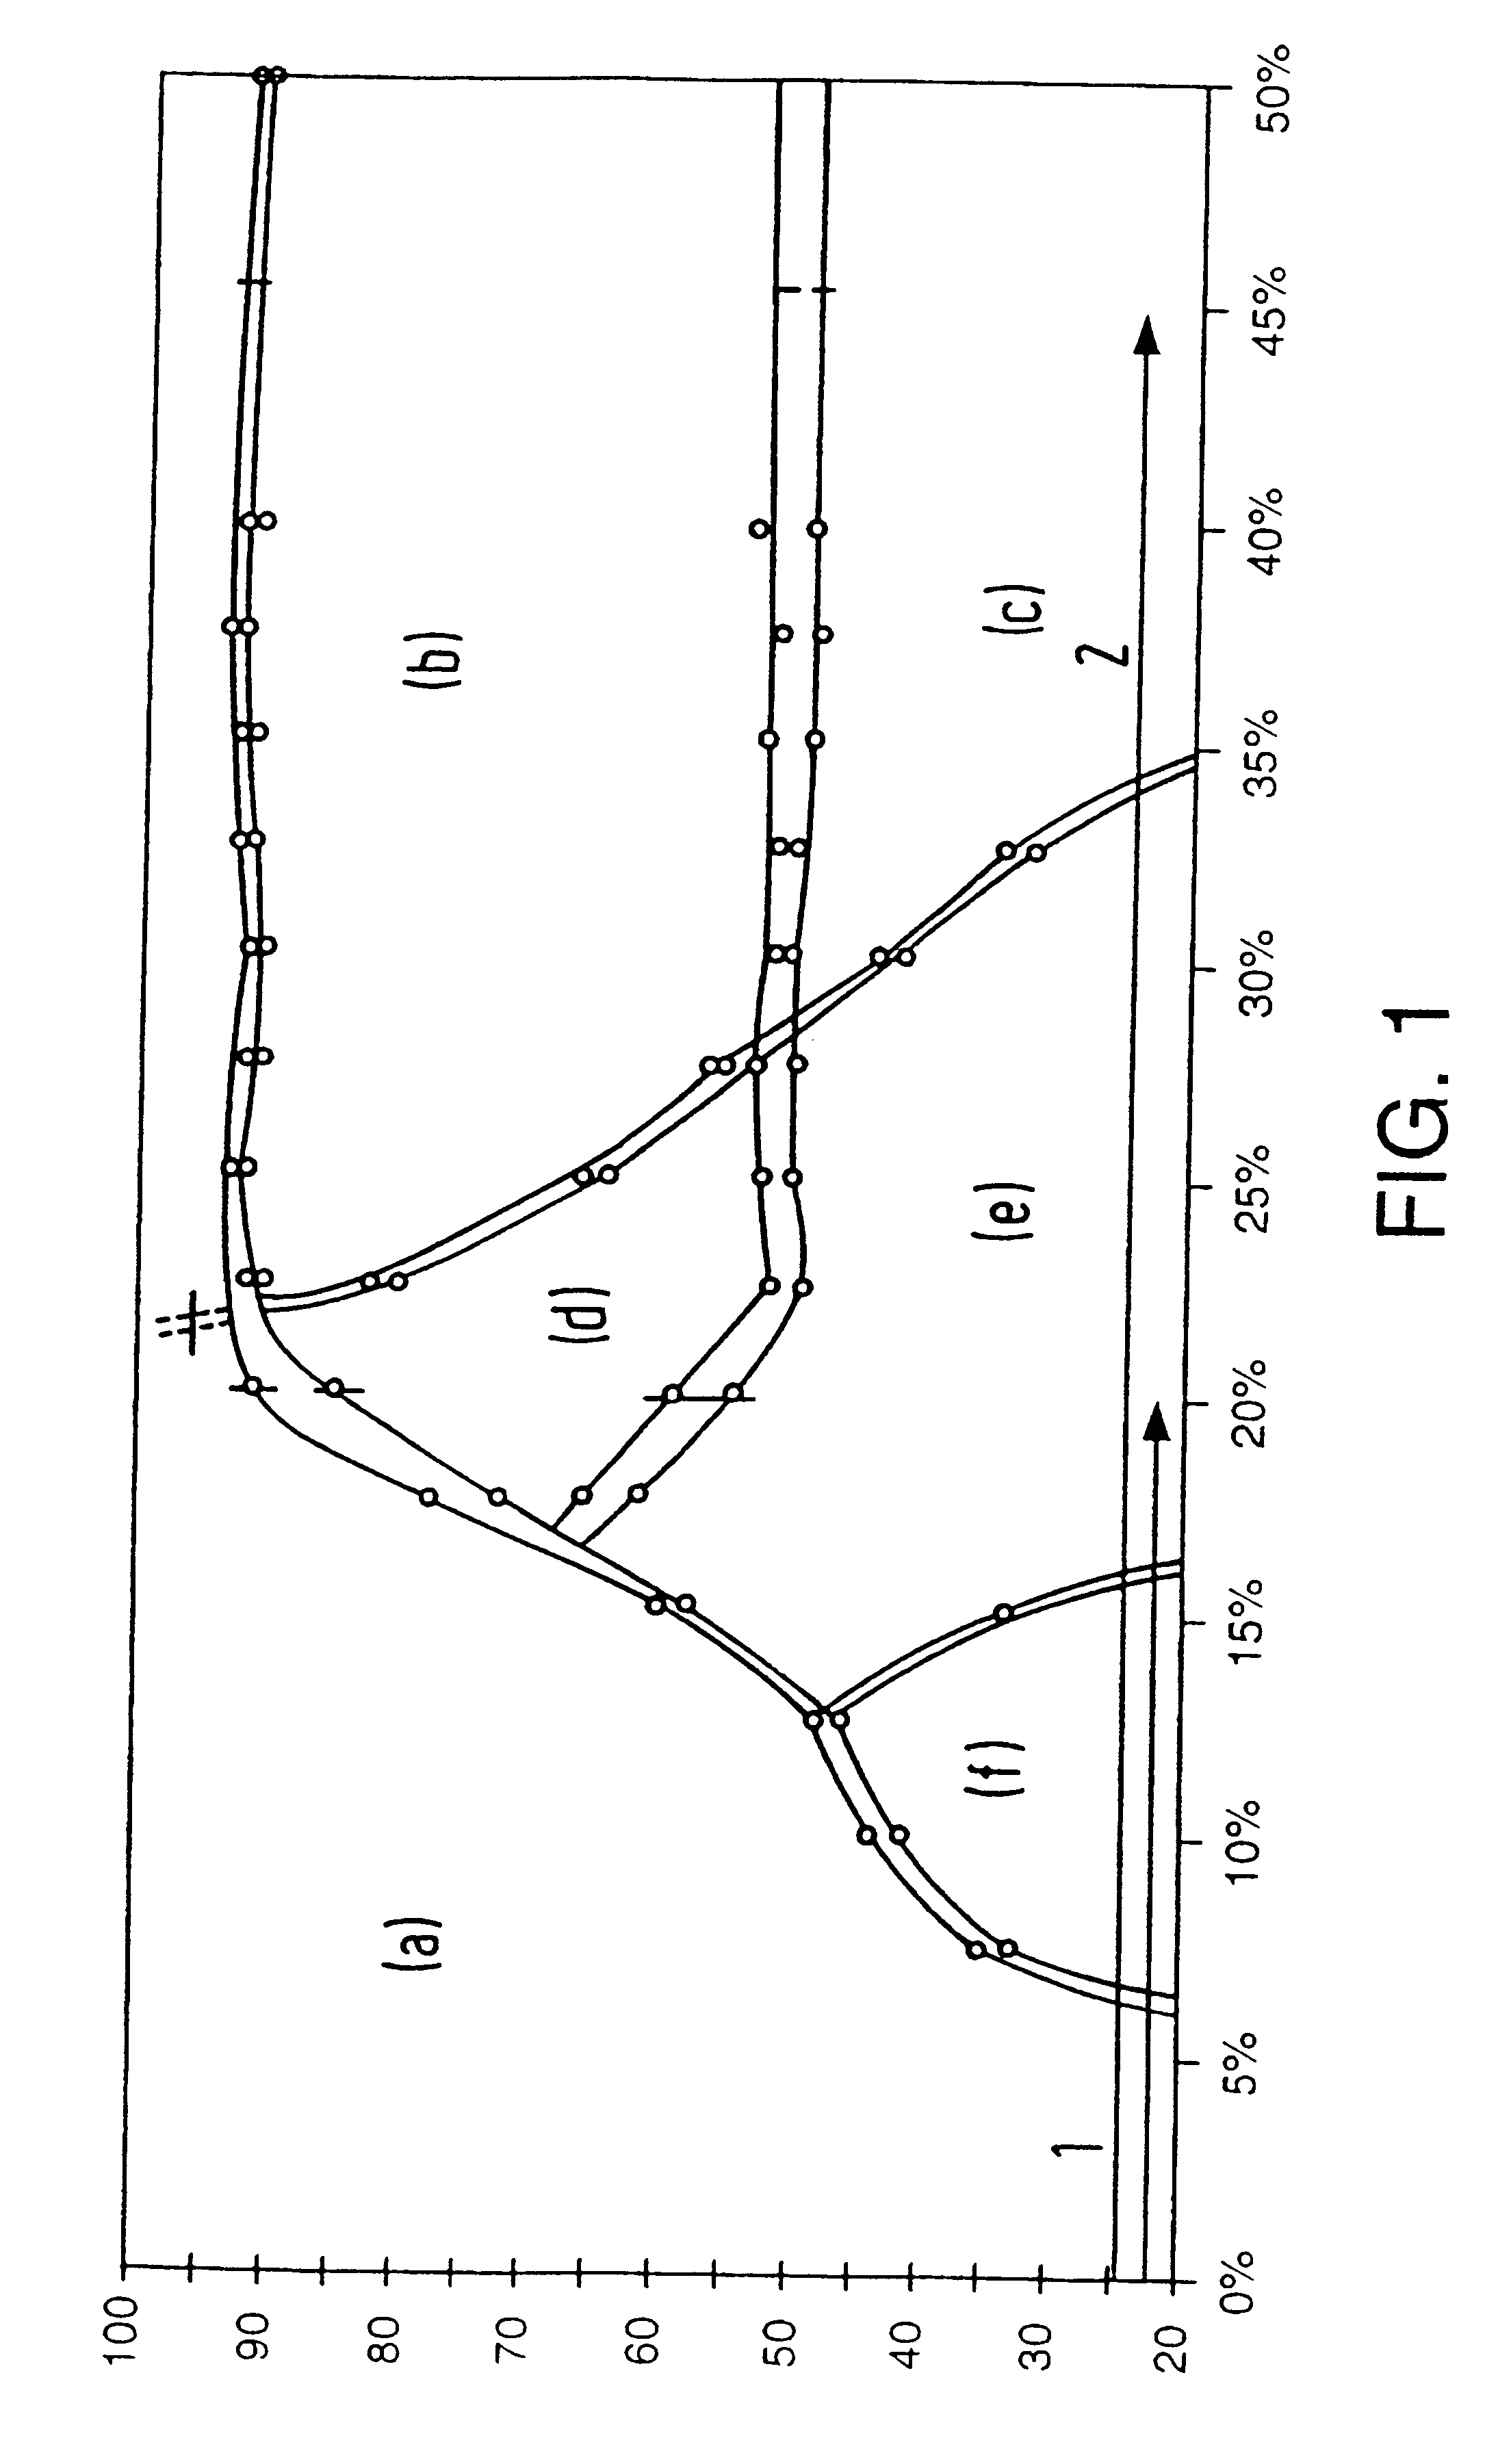 Food composition containing a monoglyceride mesomorphic phase